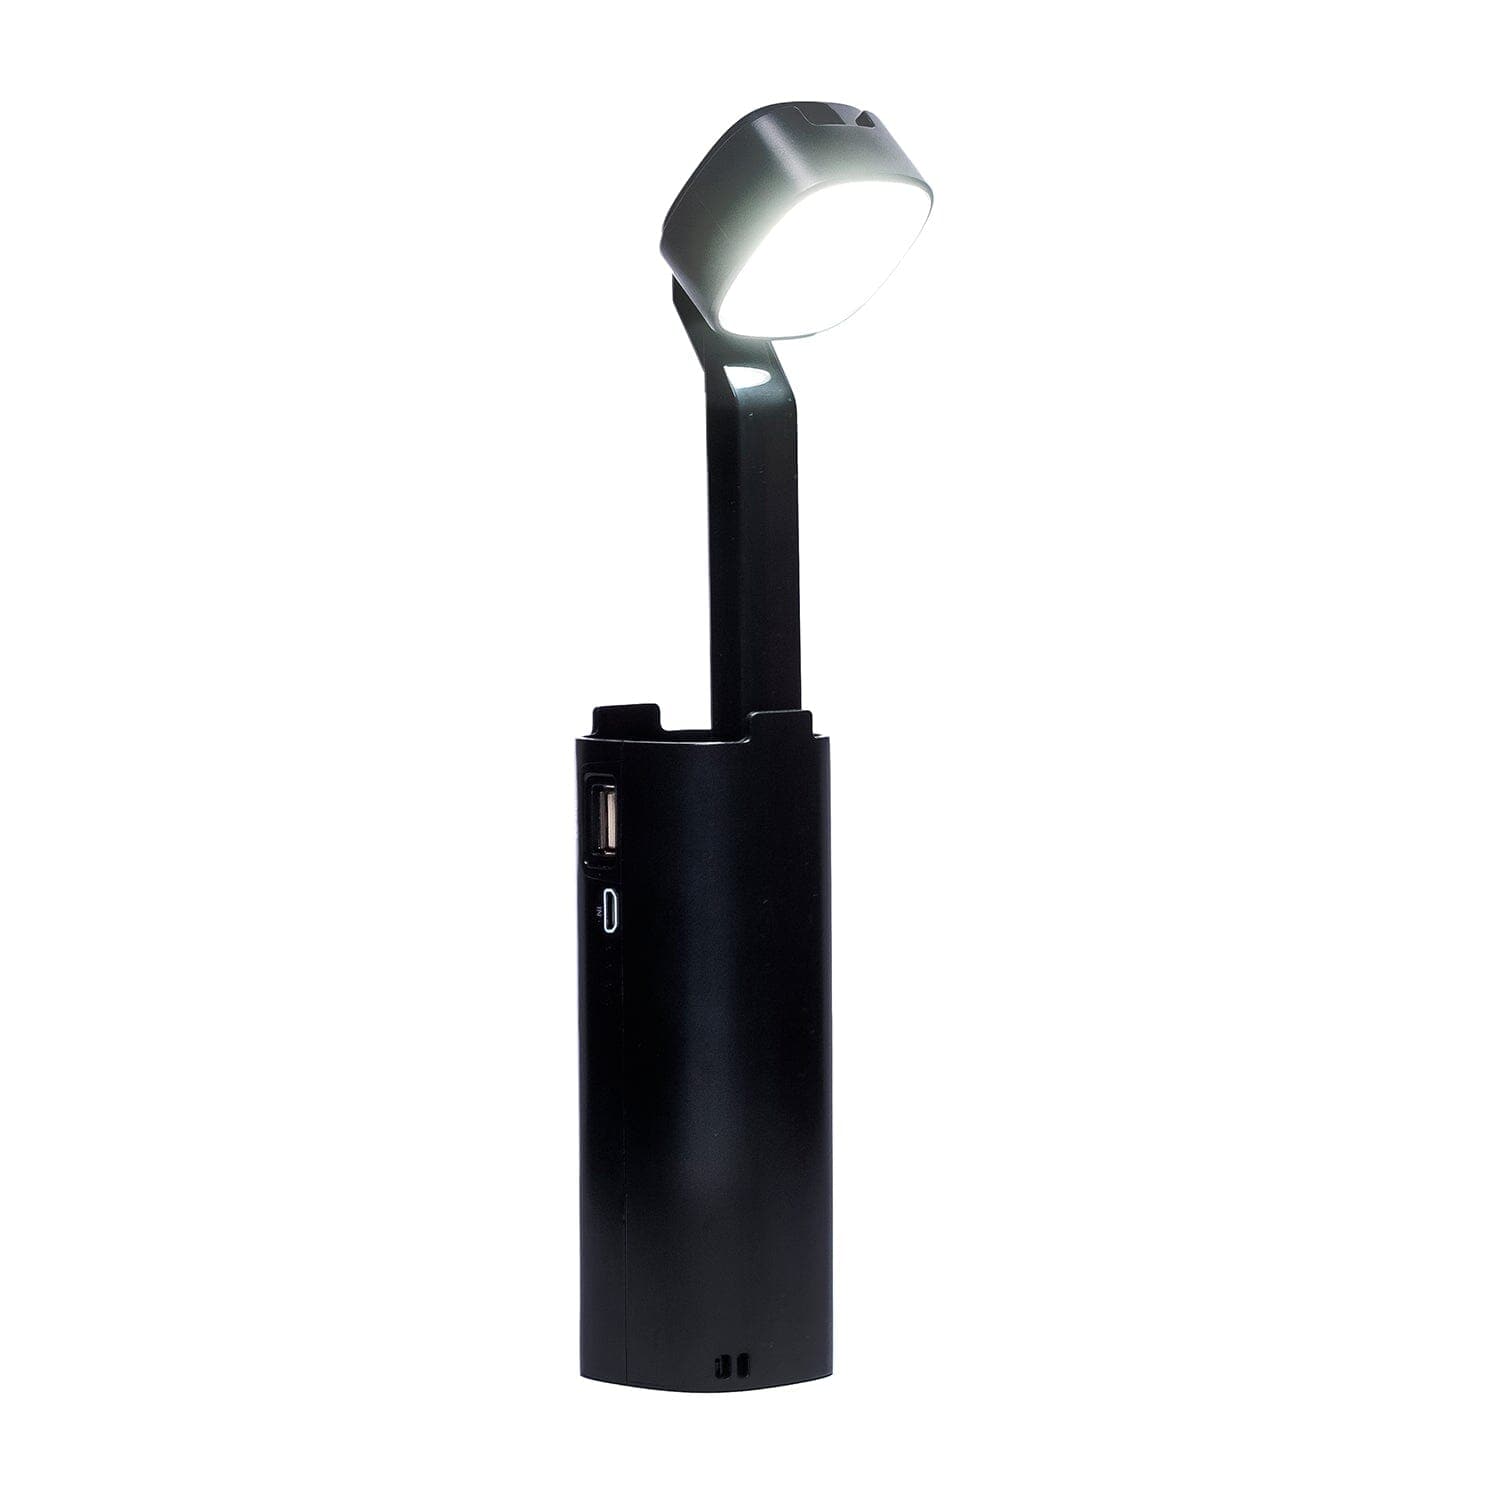 Ravencourt Living CLEARANCE - 3 in 1 Portable Daylight Lamp